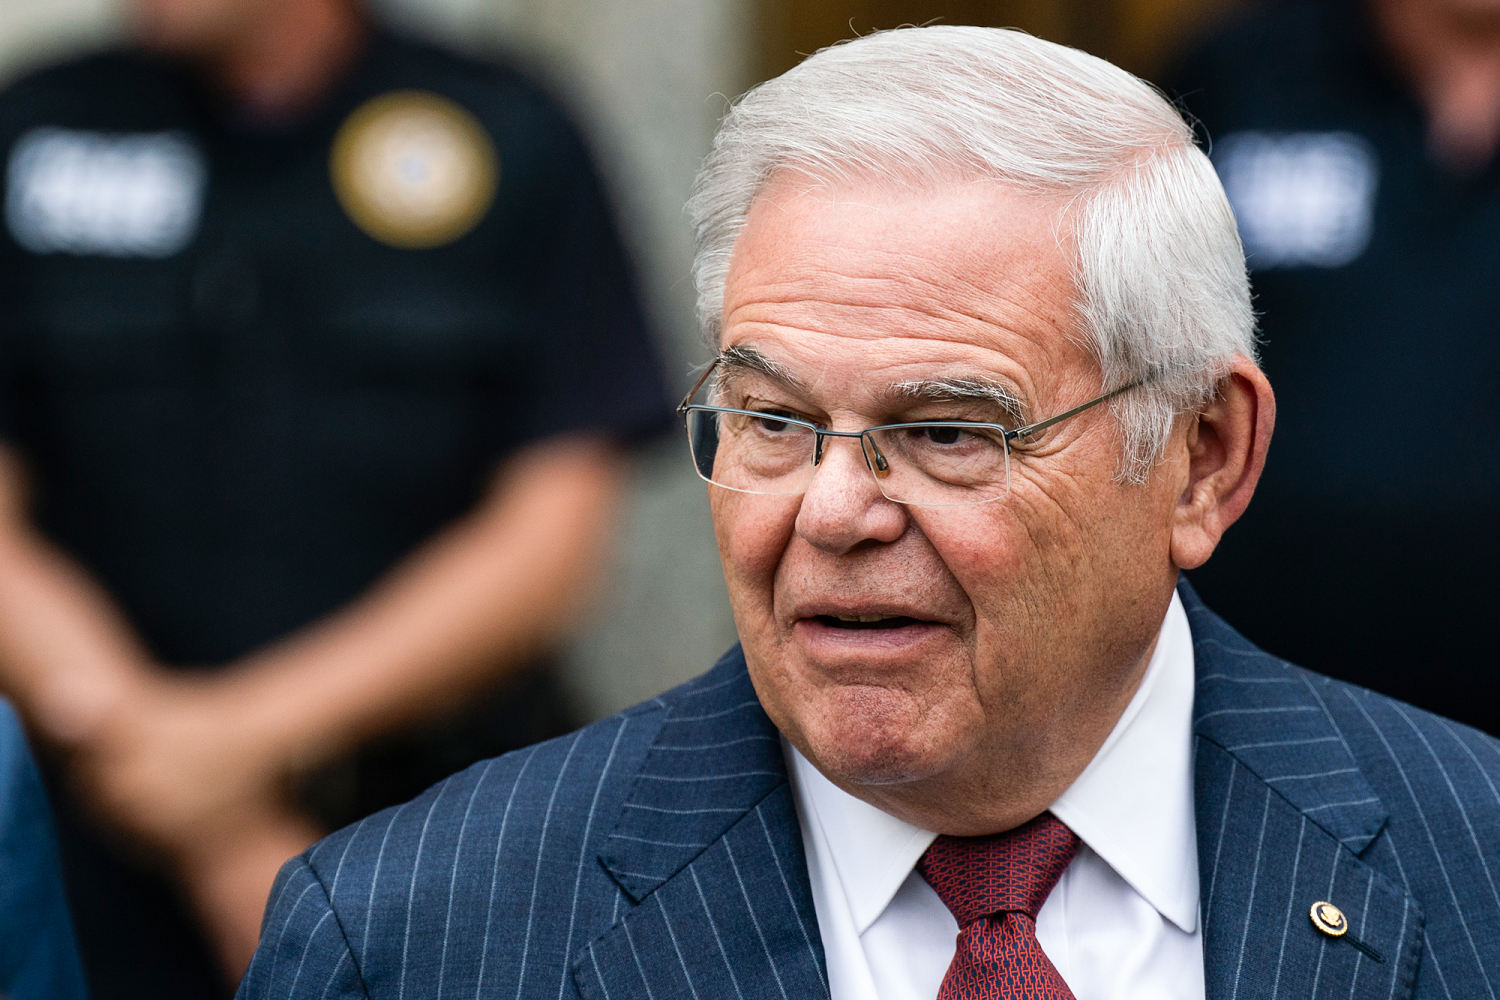 Senate Democrats tell Menendez to 'resign or face expulsion' after guilty verdict